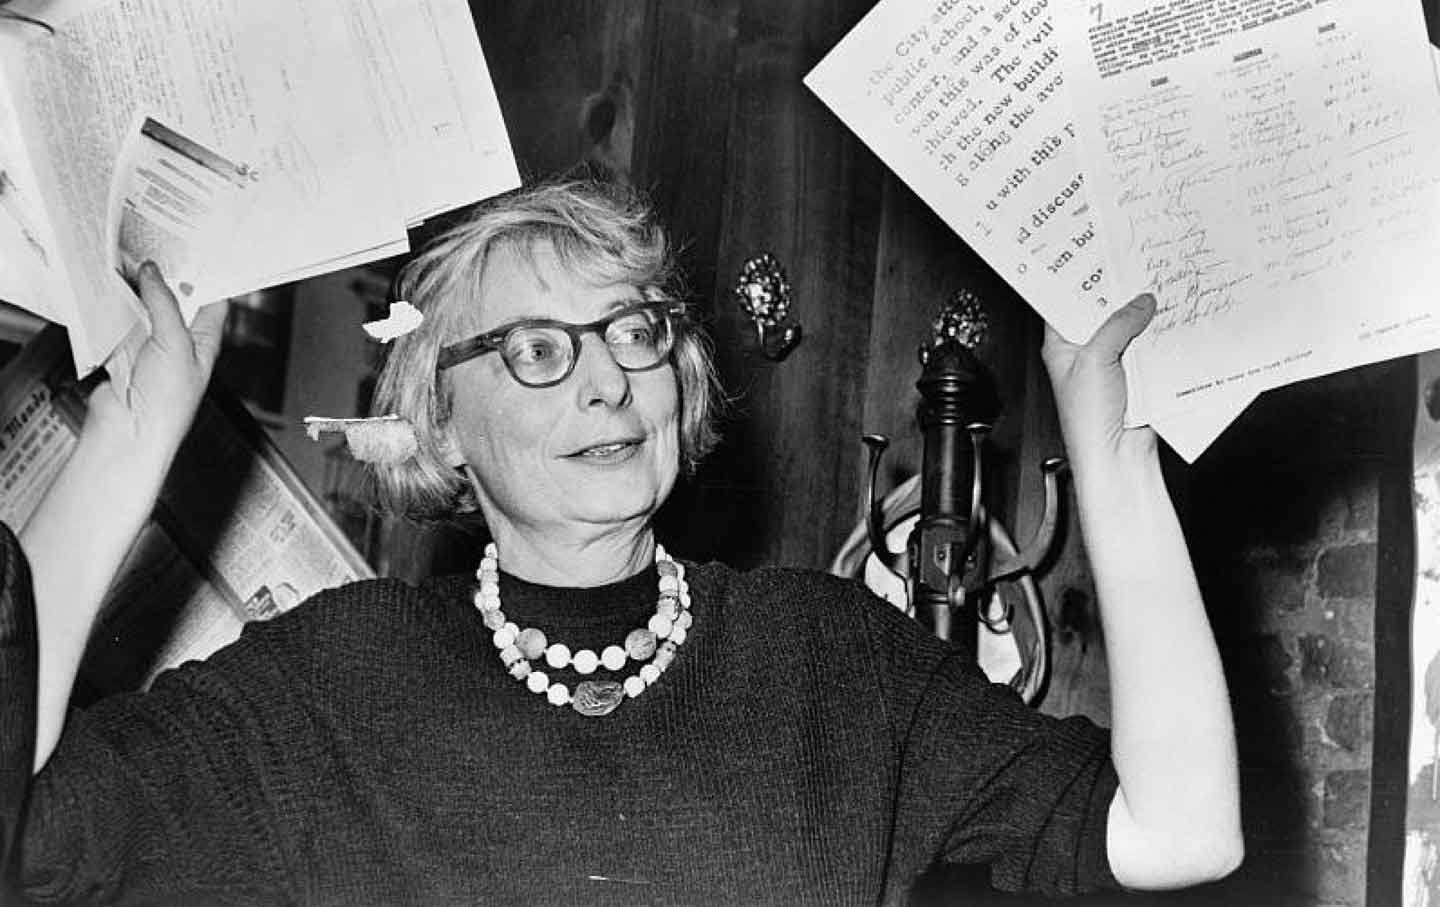 The Genius of Jane Jacobs, Who Changed the Way We Think About Cities